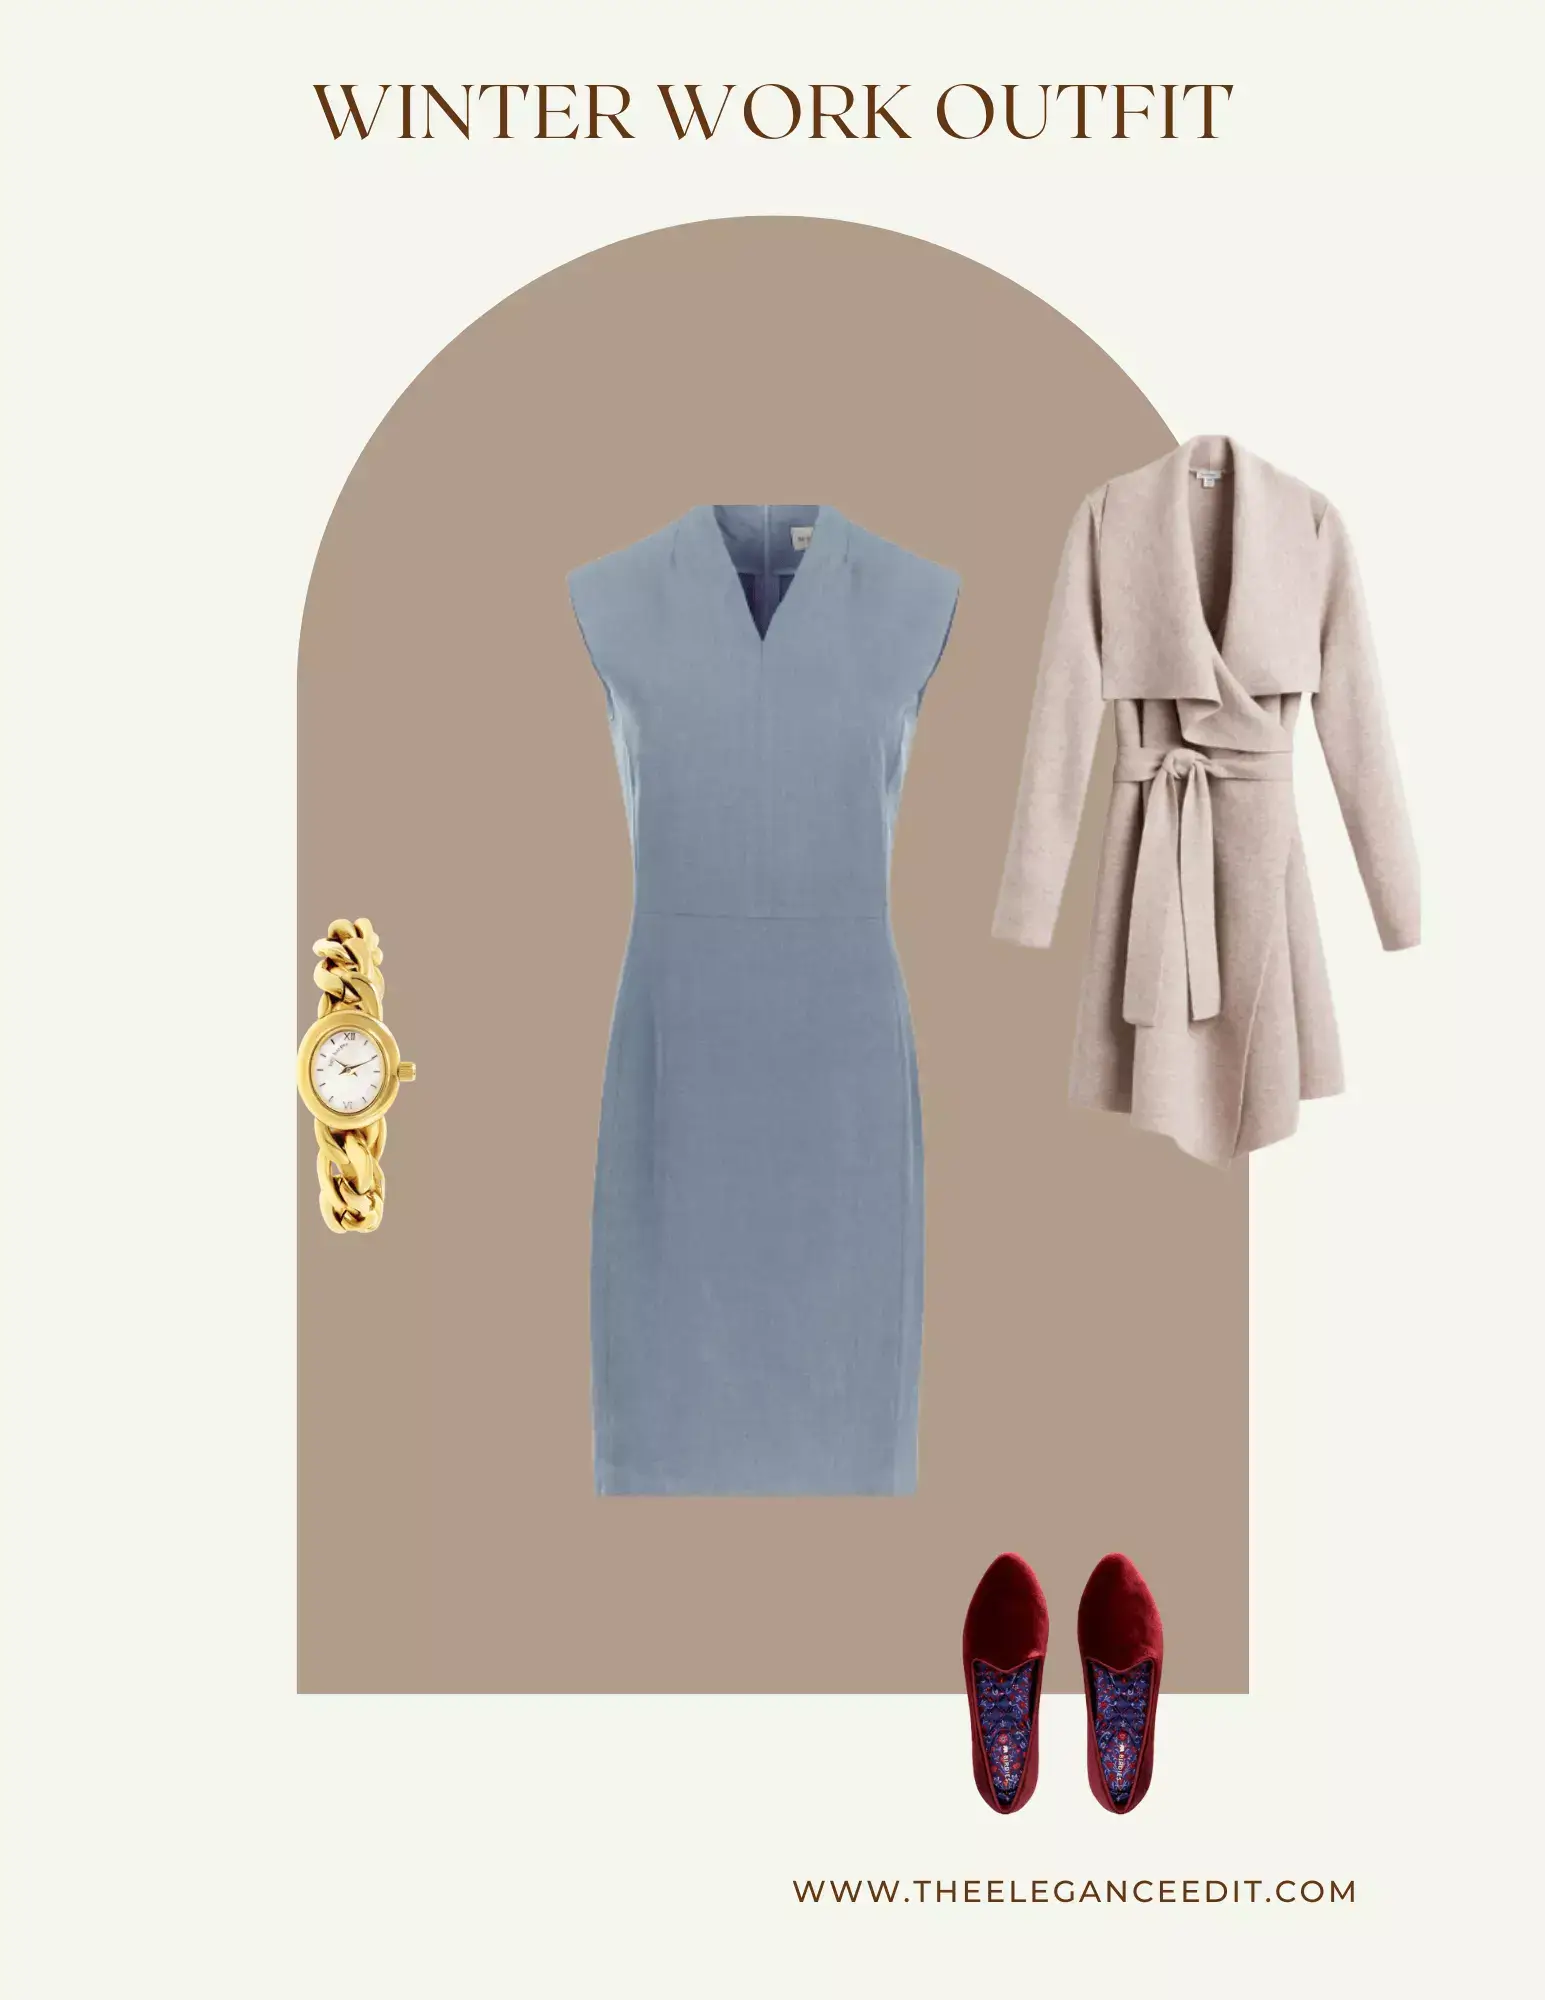 neutral colored professional outfit with blue sheath dress and loafers